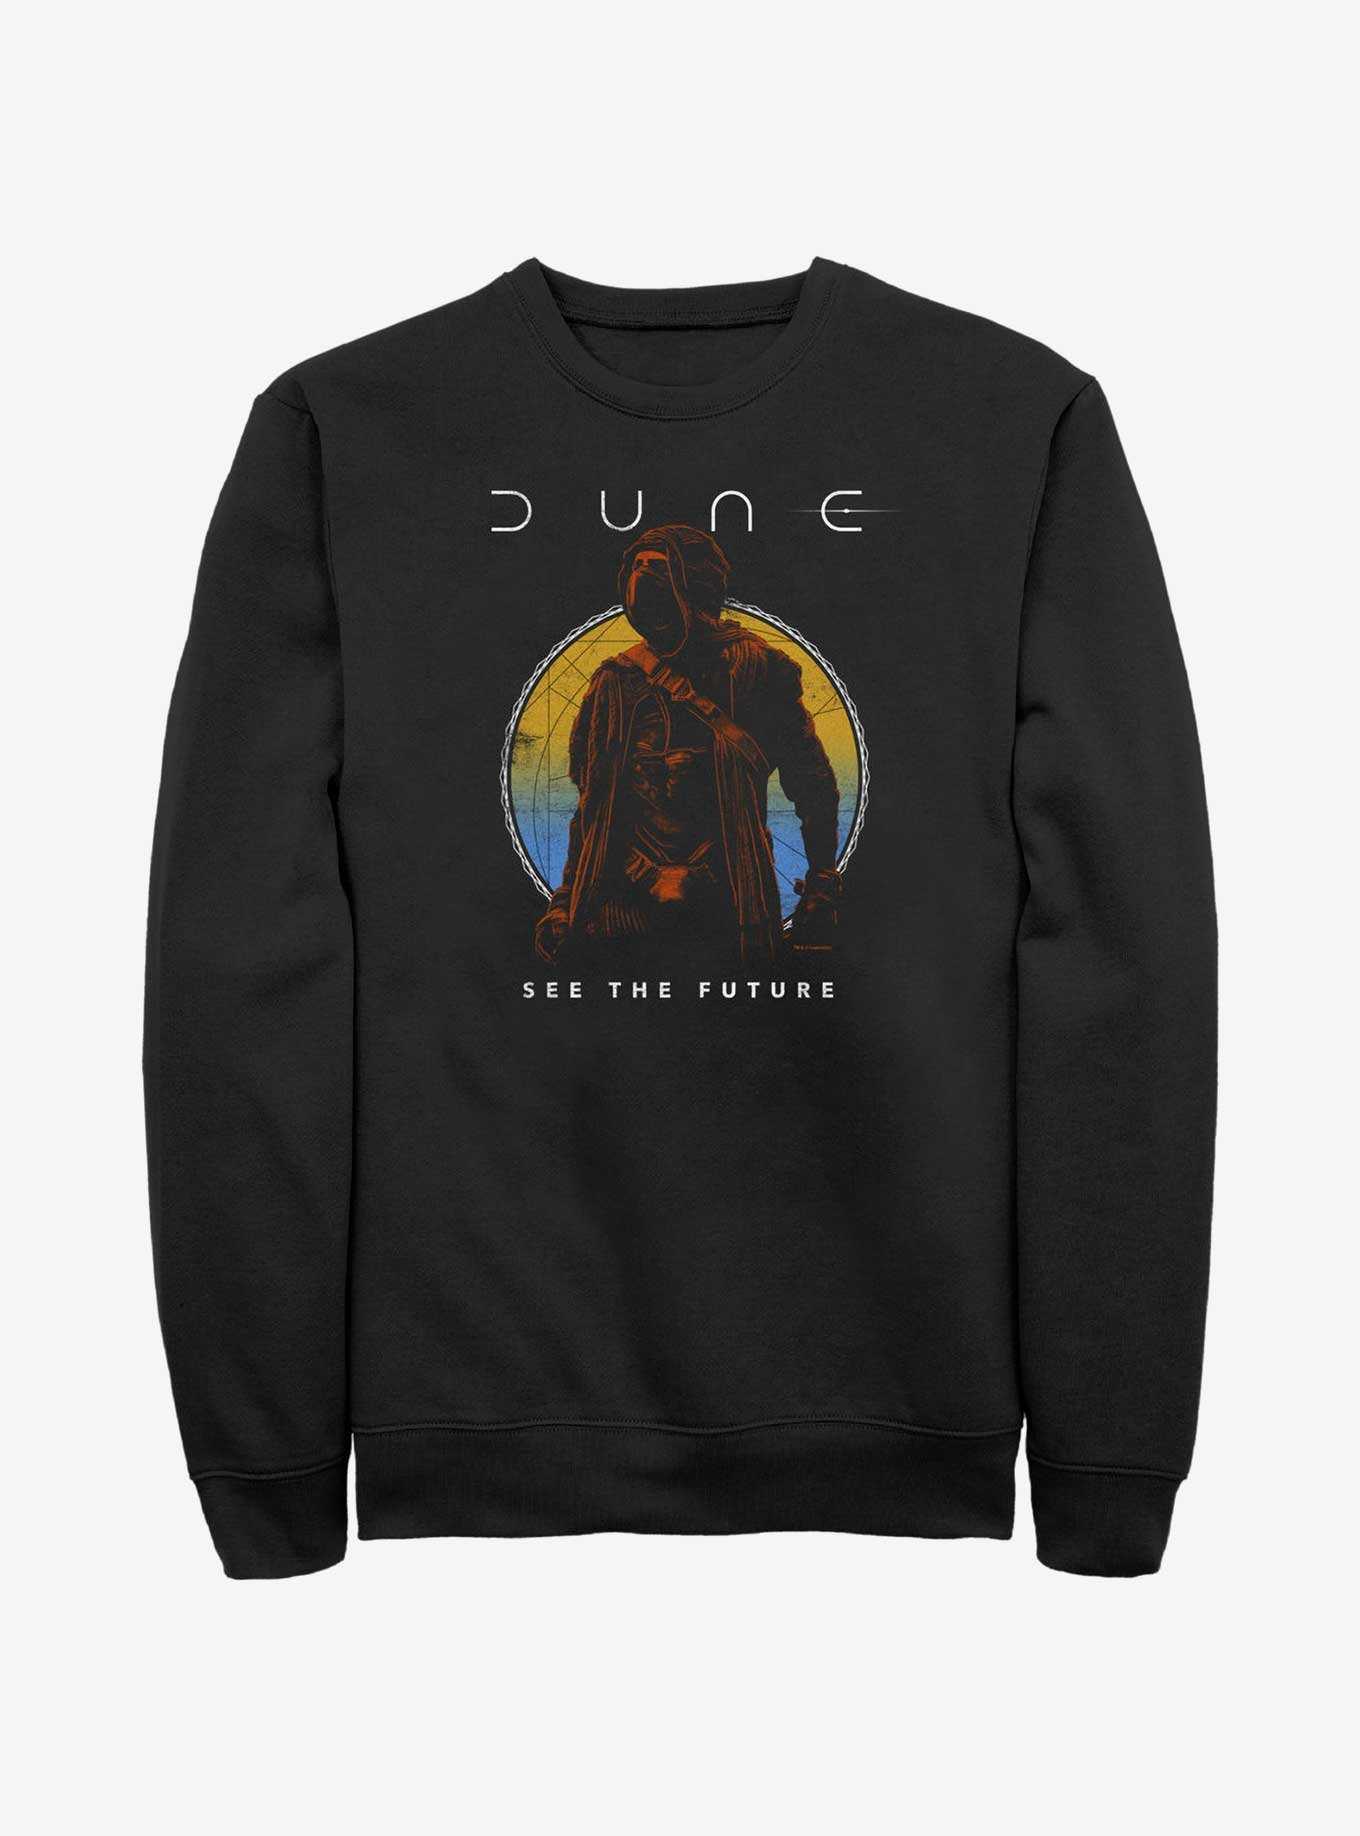 Dune: Part Two See The Future Sweatshirt, , hi-res